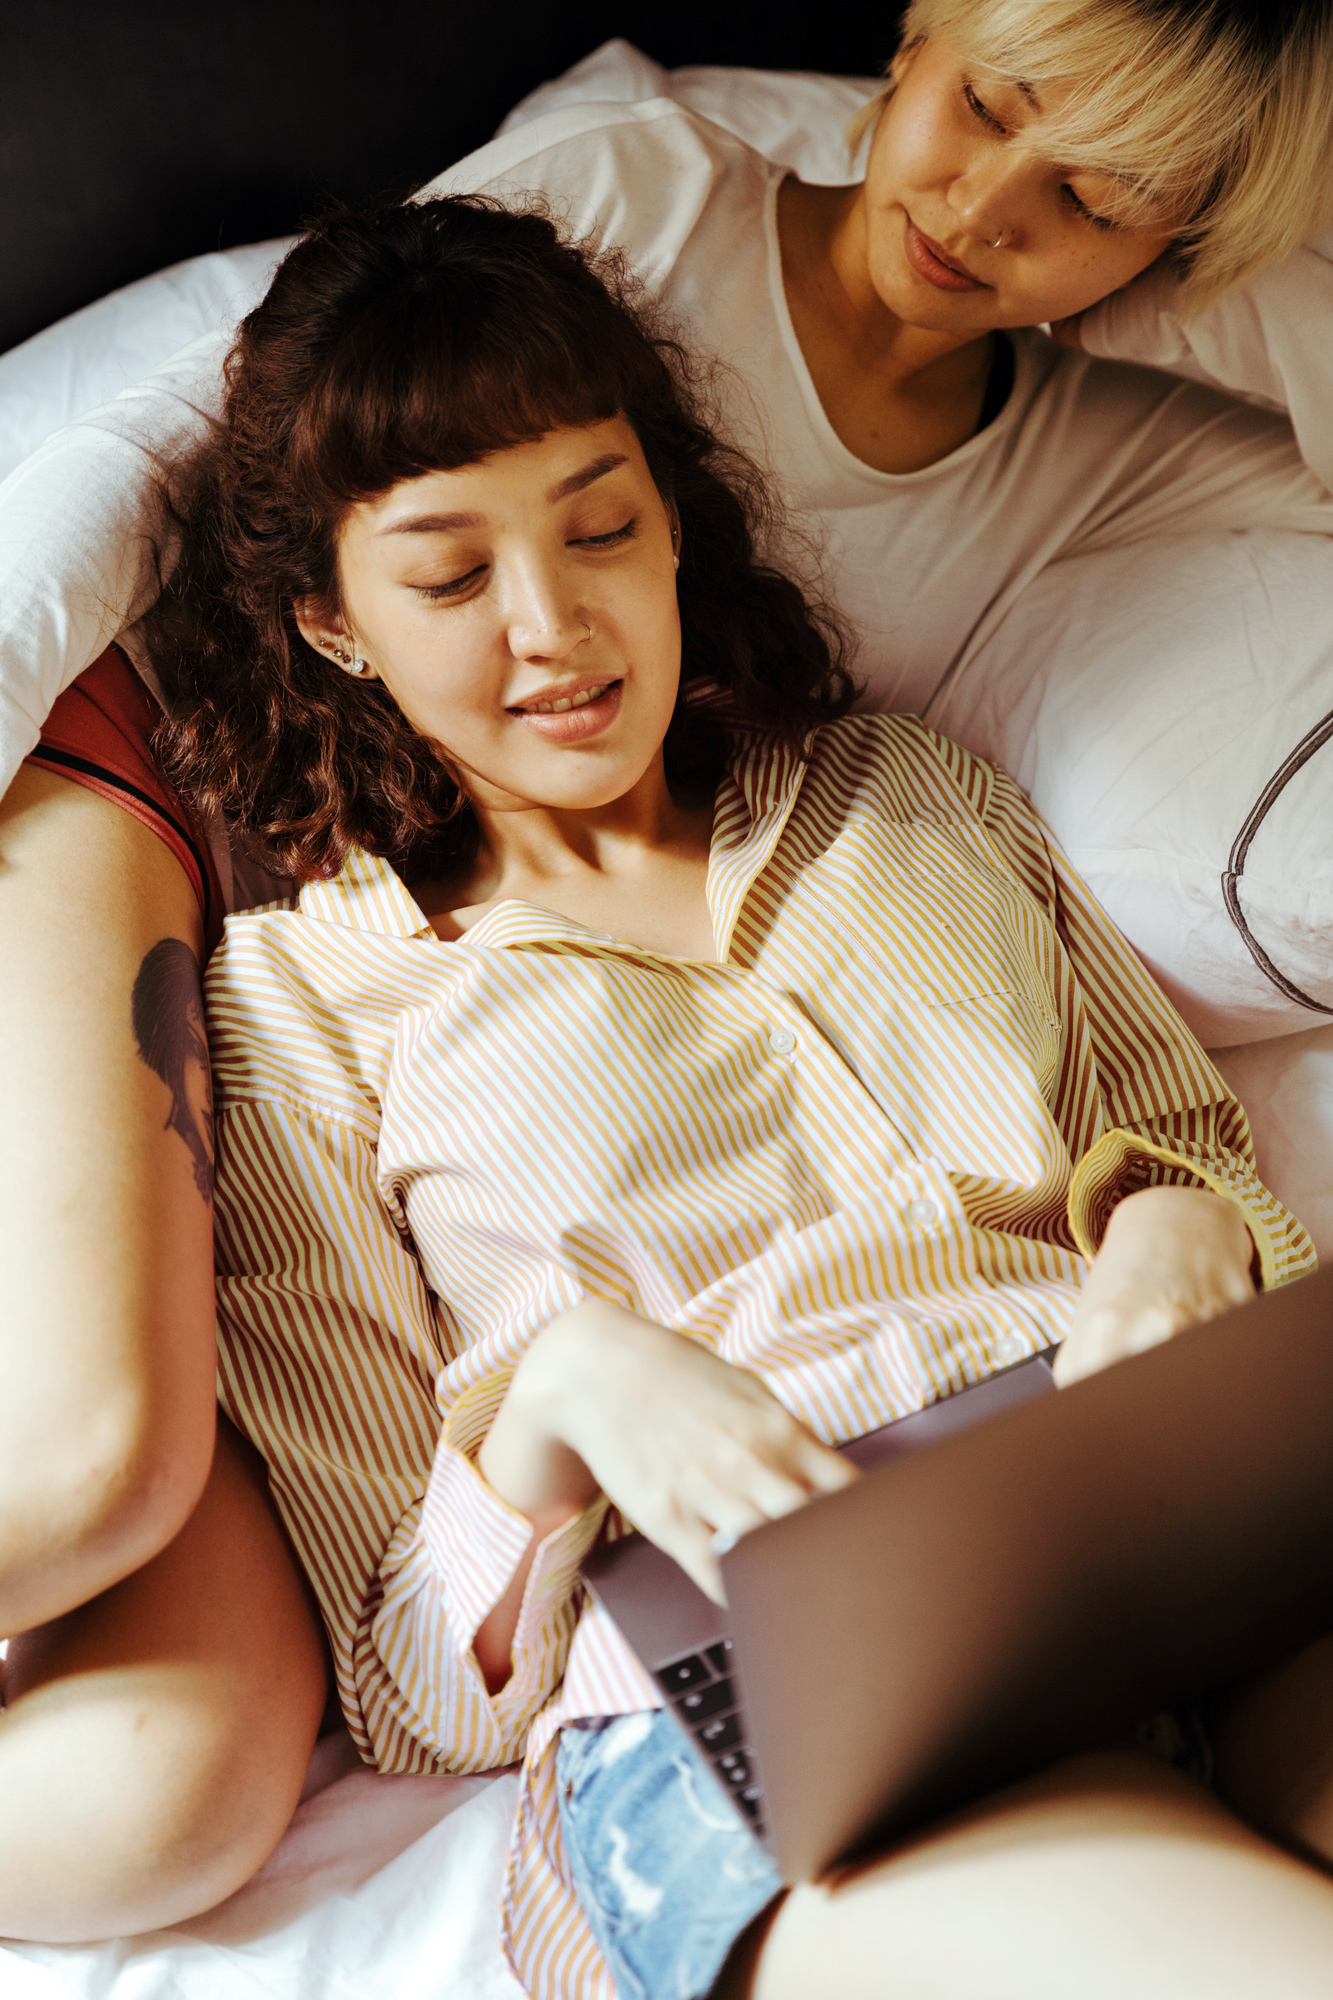 Two women in bed looking at a laptop